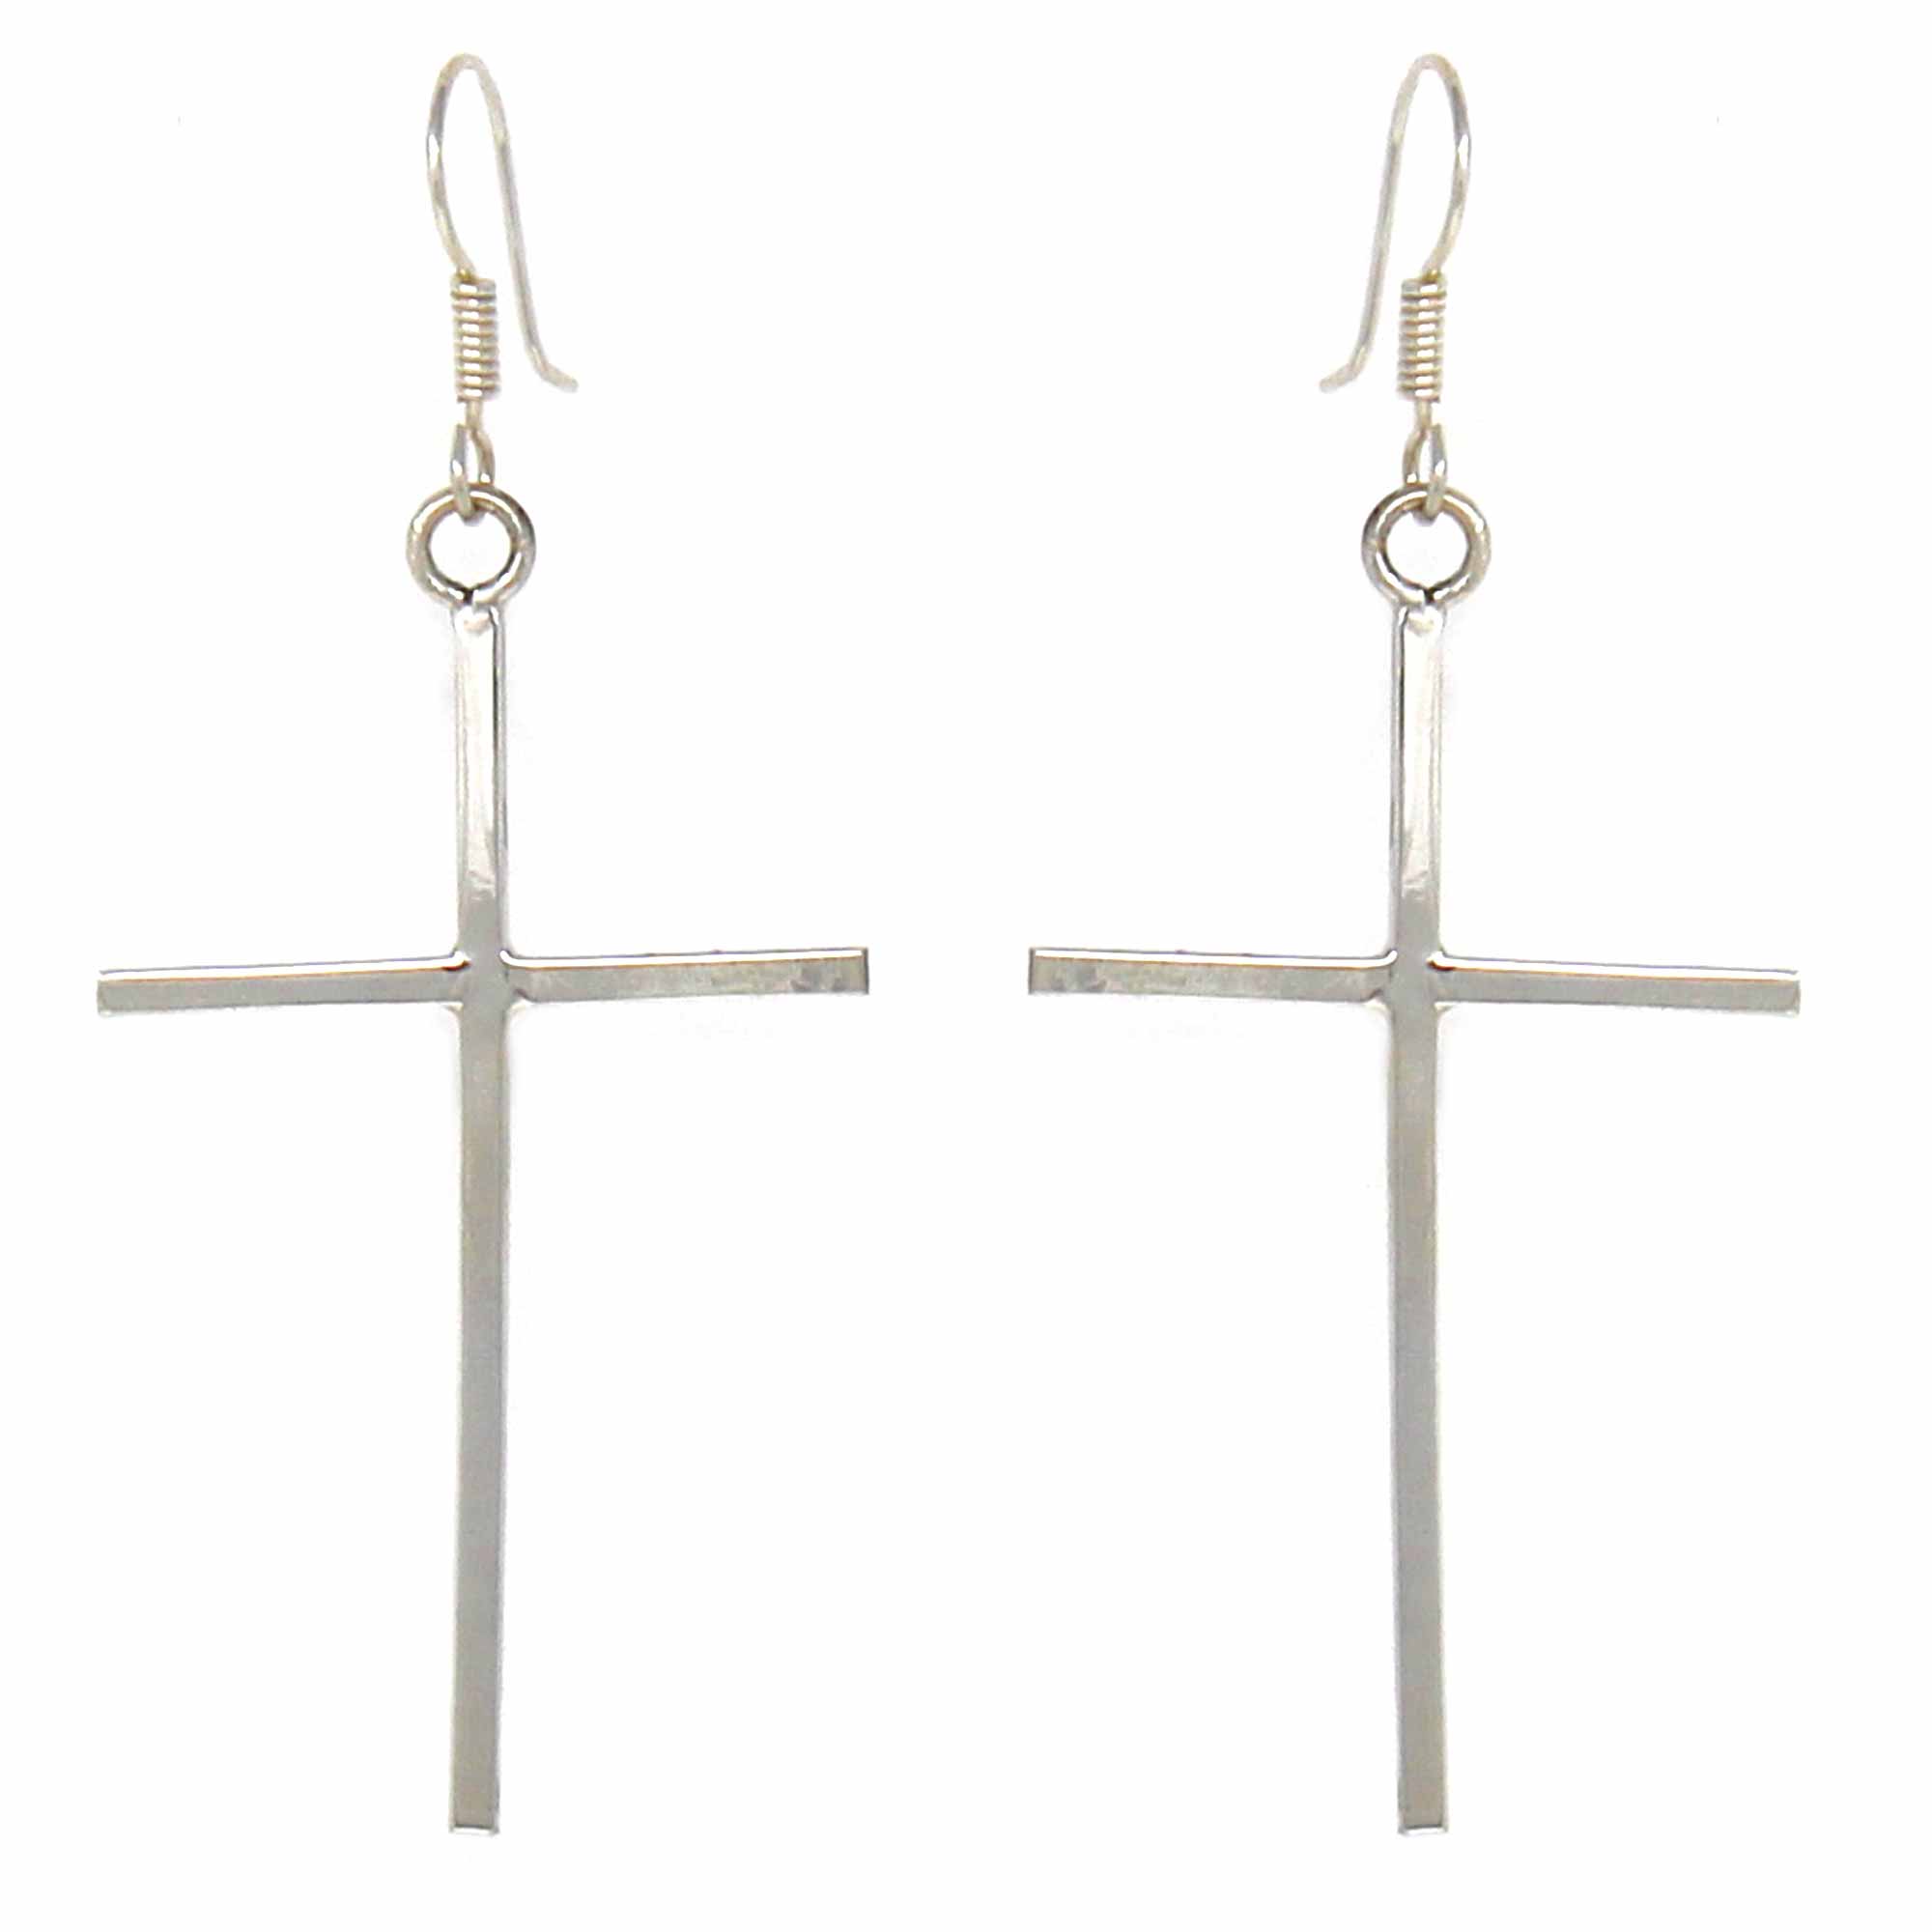 Hand Crafted Sterling Silver Dangle Hoop Earrings with a Hammered Fini -  thegoldsmith